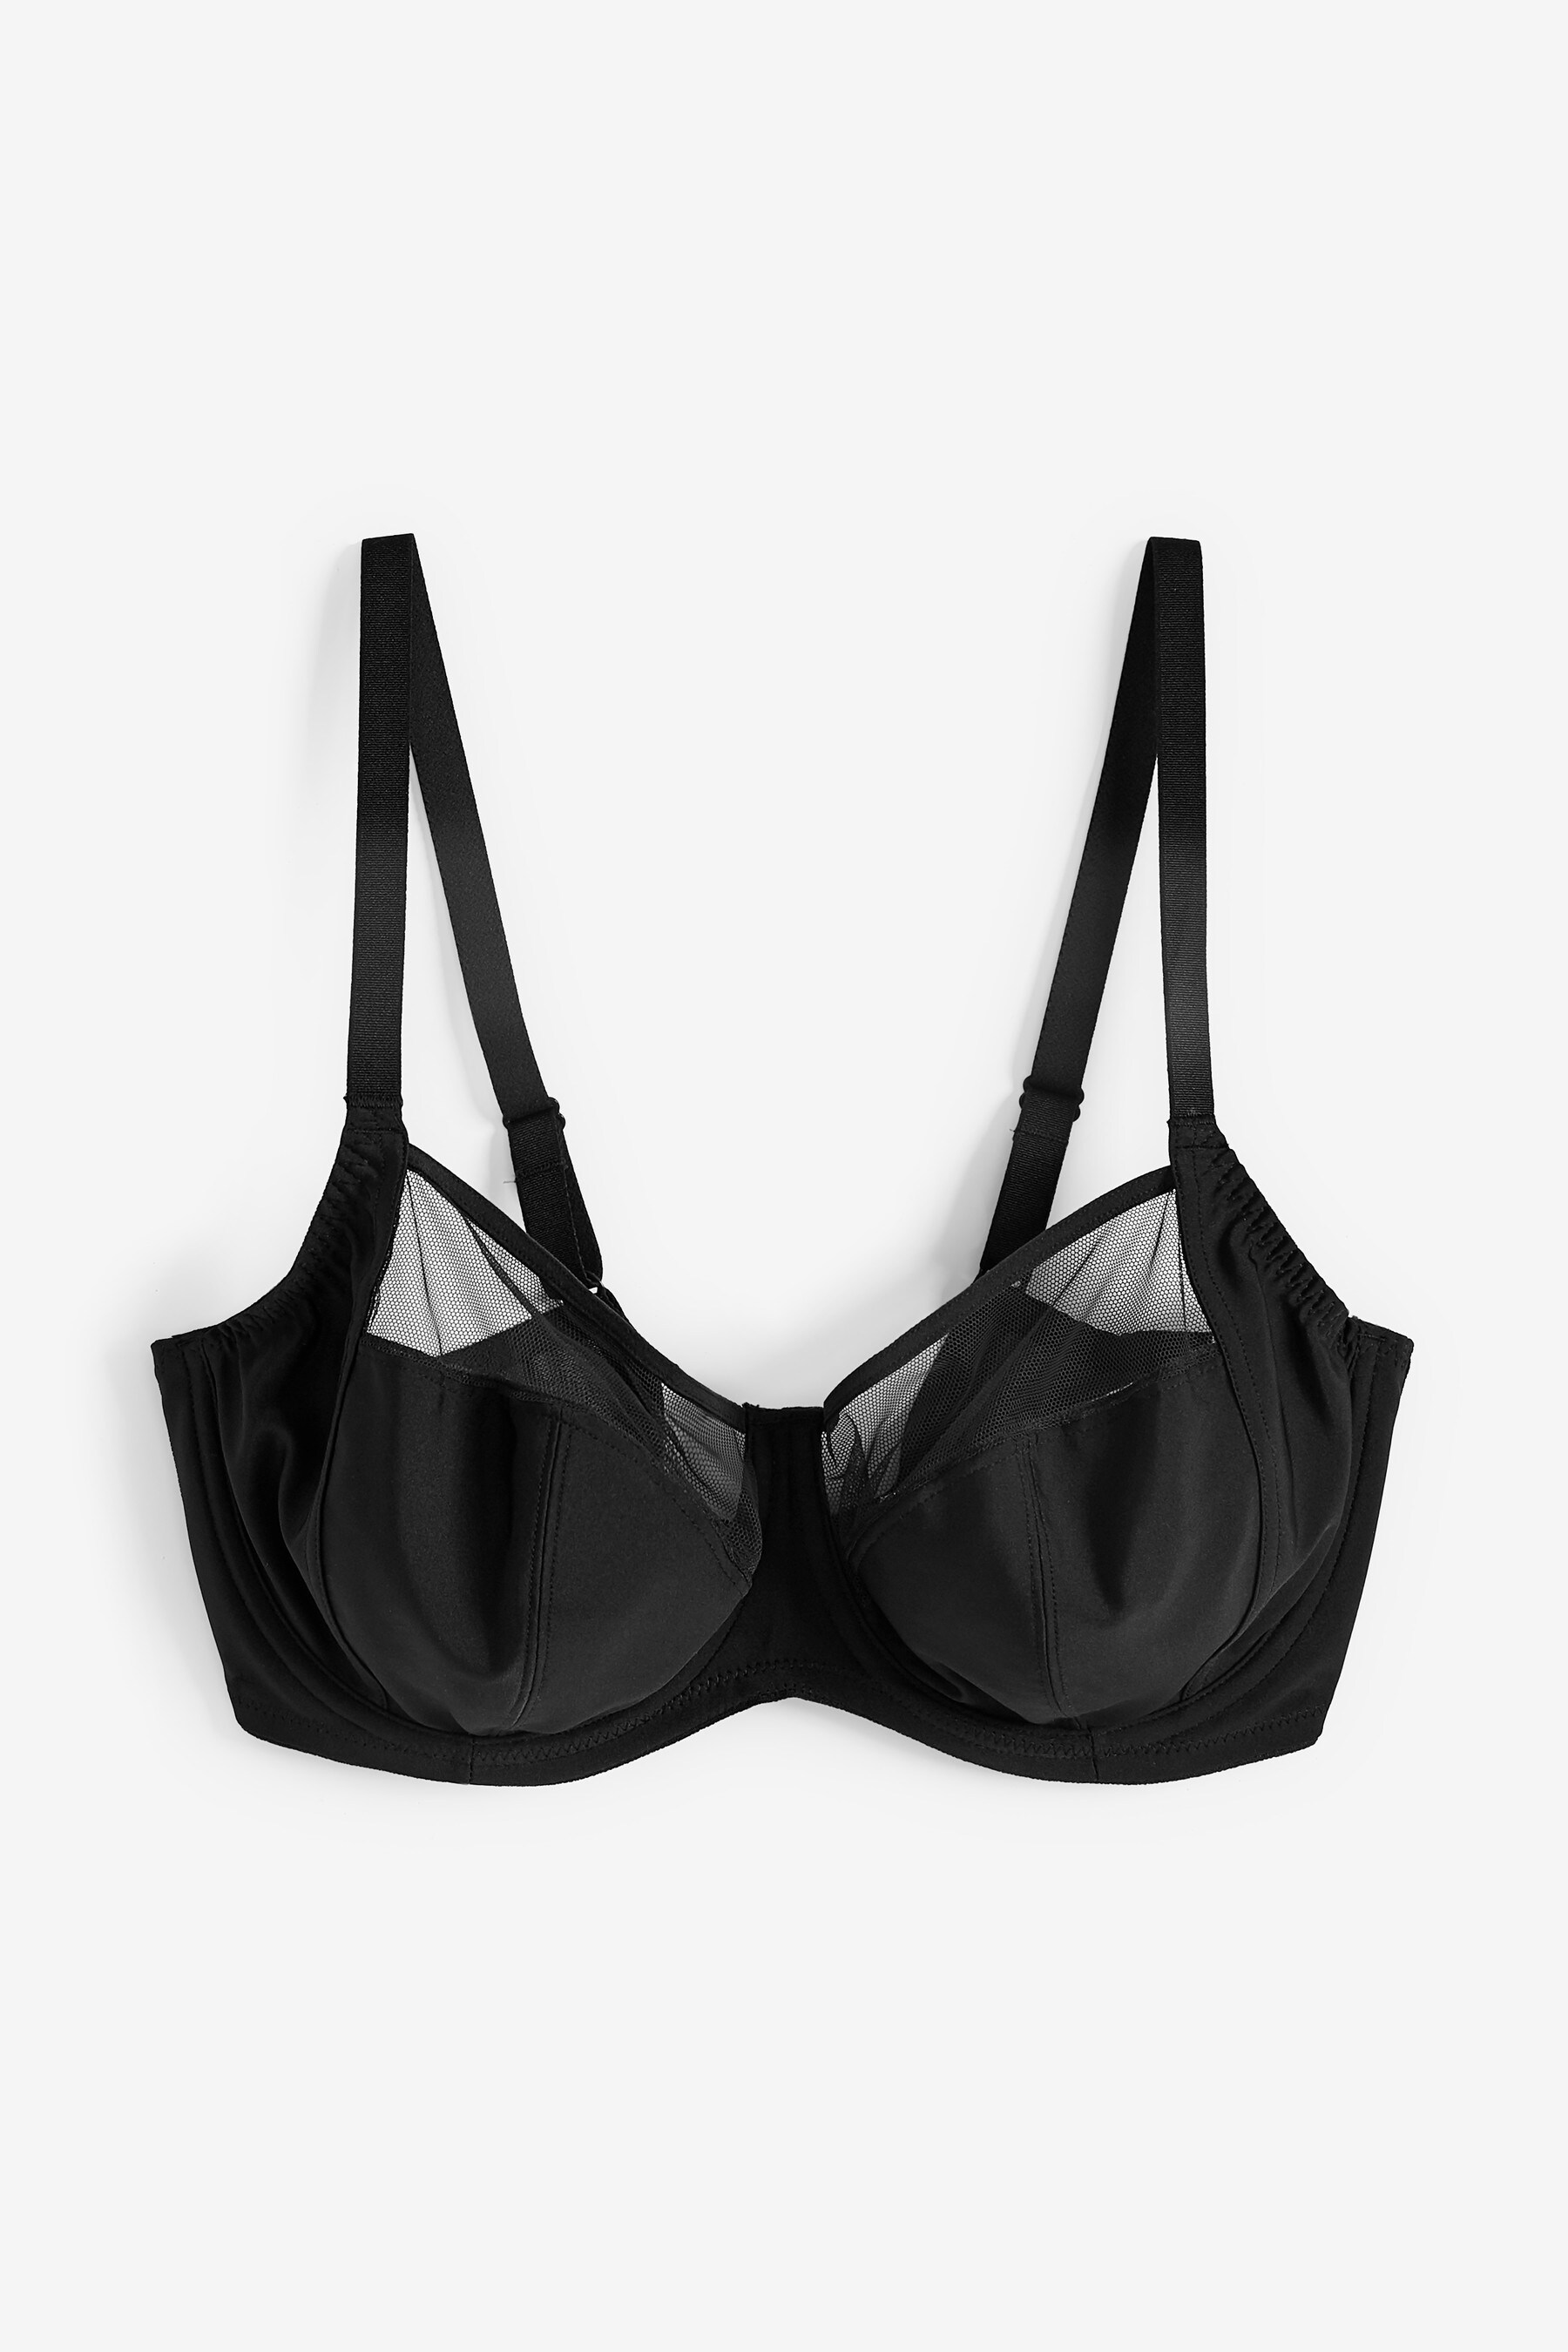 Buy Black/Nude DD+ Non Pad Full Cup Bras 2 Pack from the Next UK online ...